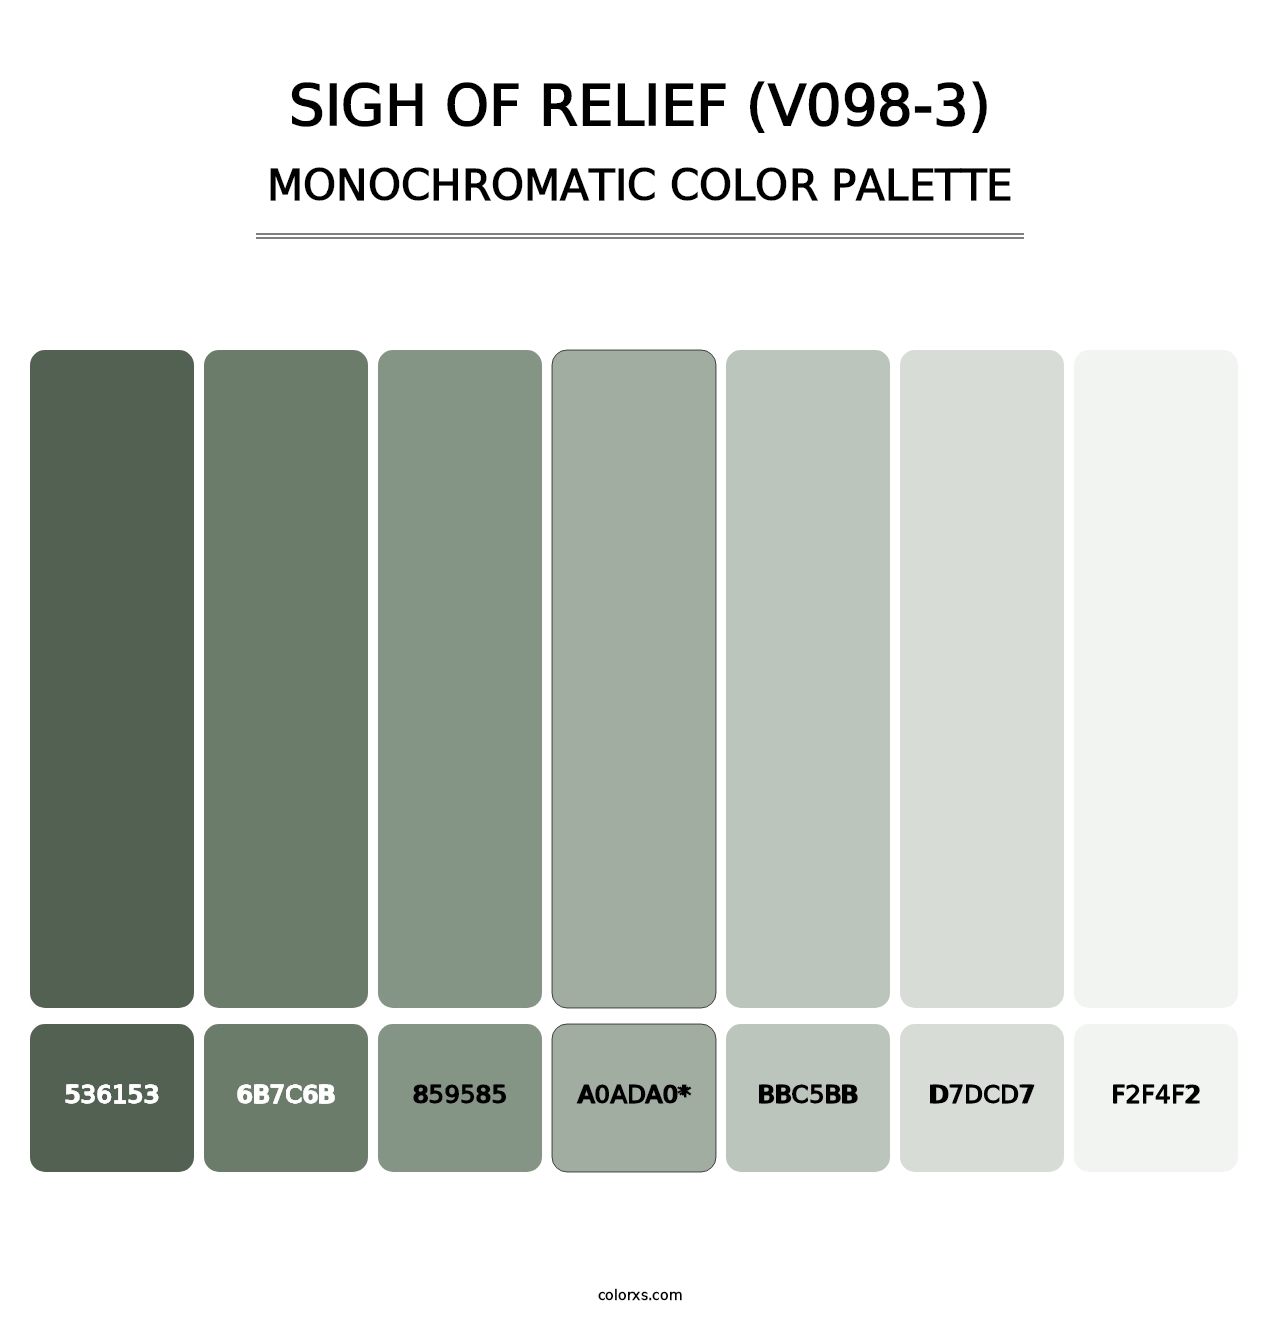 Sigh of Relief (V098-3) - Monochromatic Color Palette